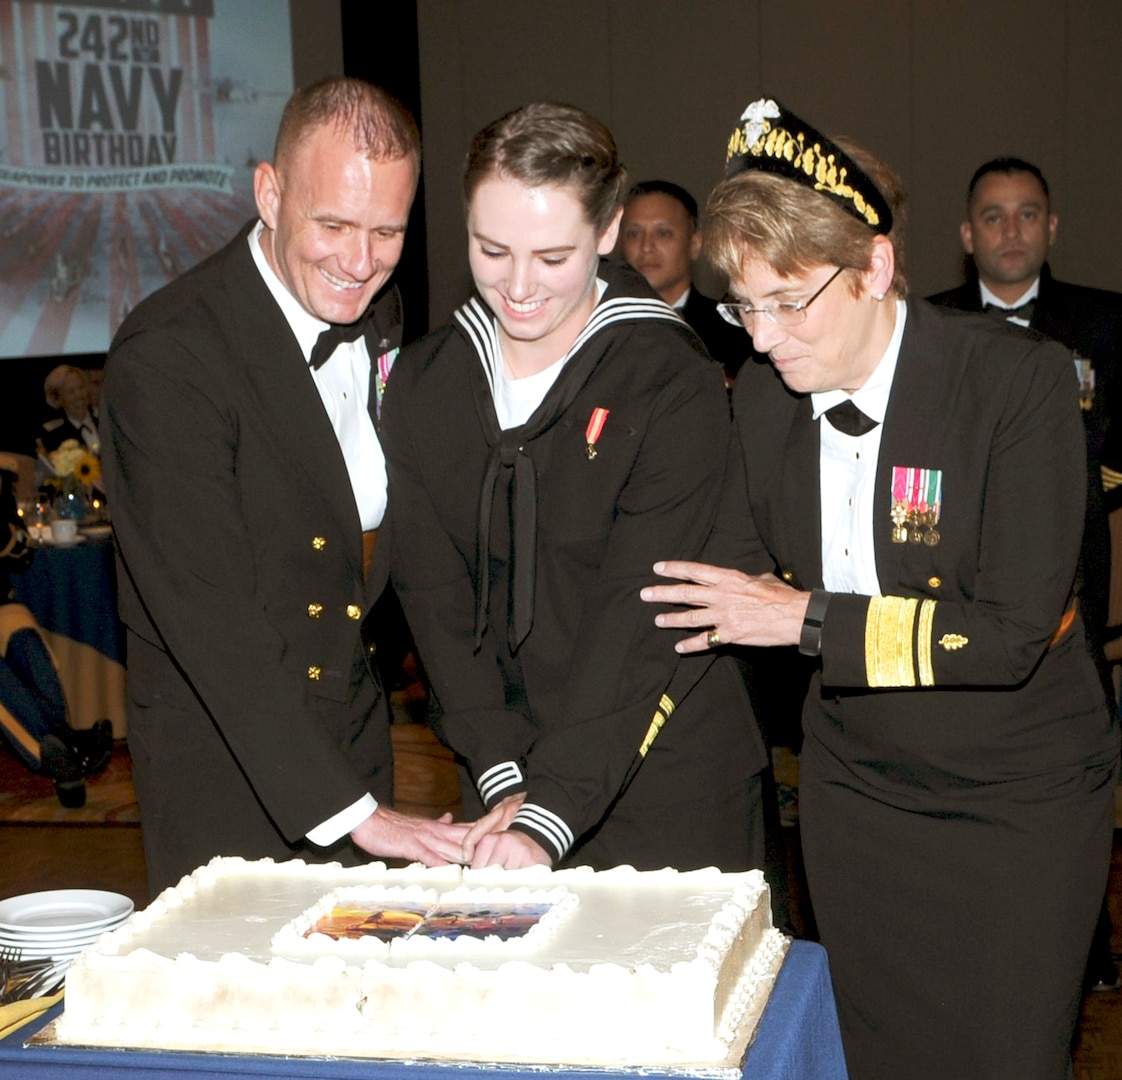 Master Chief Petty Officer of the Navy (MCPON) Steven S. Giordano, left, and Rear Adm. Rebecca McCormick-Boyle, right, commander, Navy Medicine Education, Training and Logistics Command (NMETLC), cut the ceremonial cake with Seaman Recruit Harley Valdez, the youngest Sailor in attendance, at the Texas Regional Navy Birthday Ball Oct. 20 in San Antonio, Texas. More than a dozen sea service commands in the San Antonio area gather annually to celebrate the Navy birthday in a joint celebration.